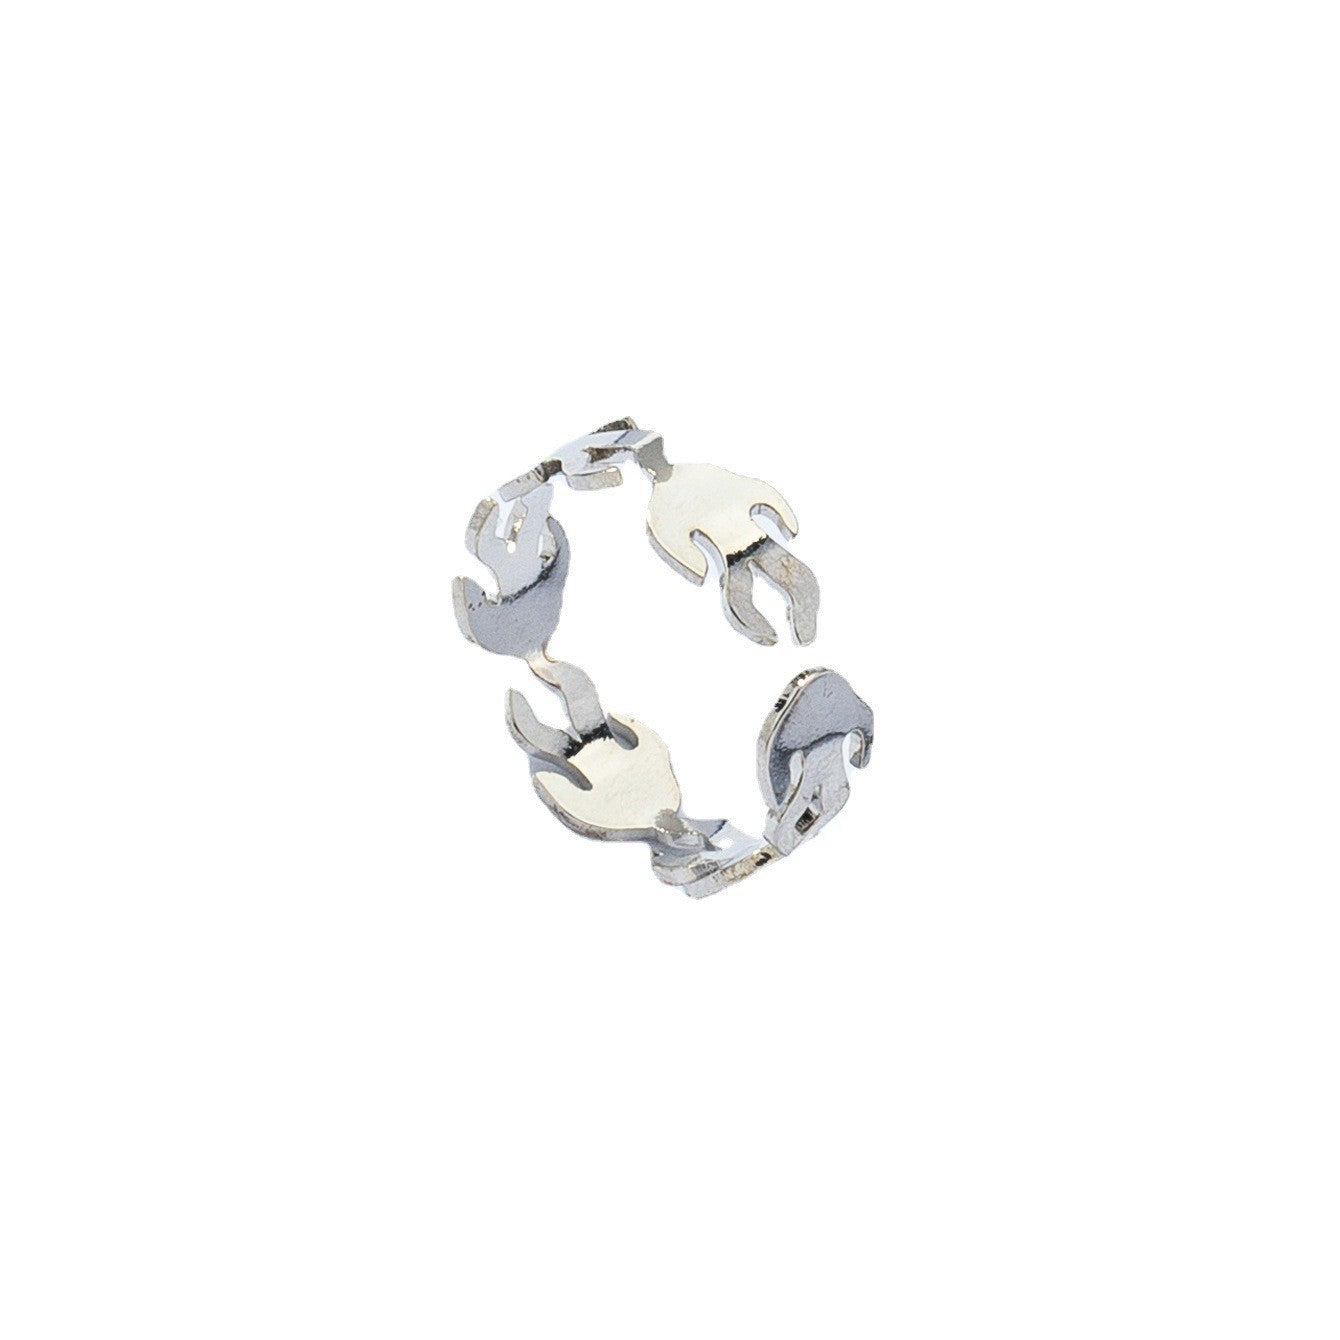 Vienna Verve Metal Ring - Unique Female Minority Design, Adjustable Fit, Stylish and Durable